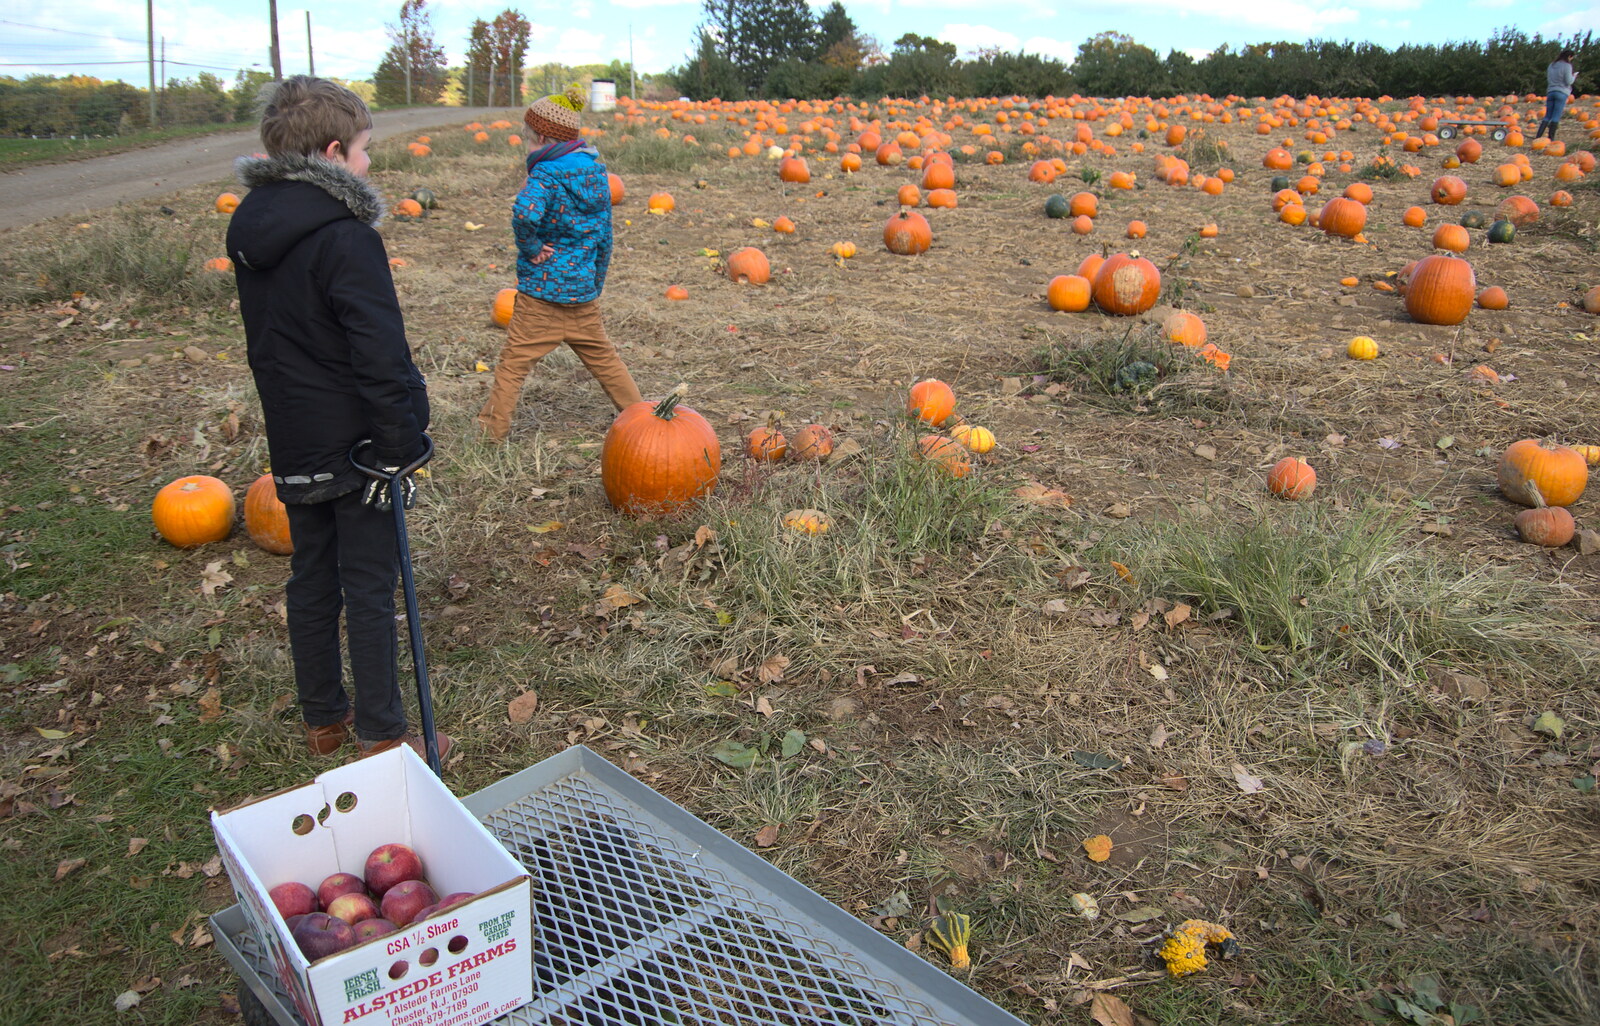 We arrive at the pumpkin field from Pumpkin Picking at Alstede Farm, Chester, Morris County, New Jersey - 24th October 2018